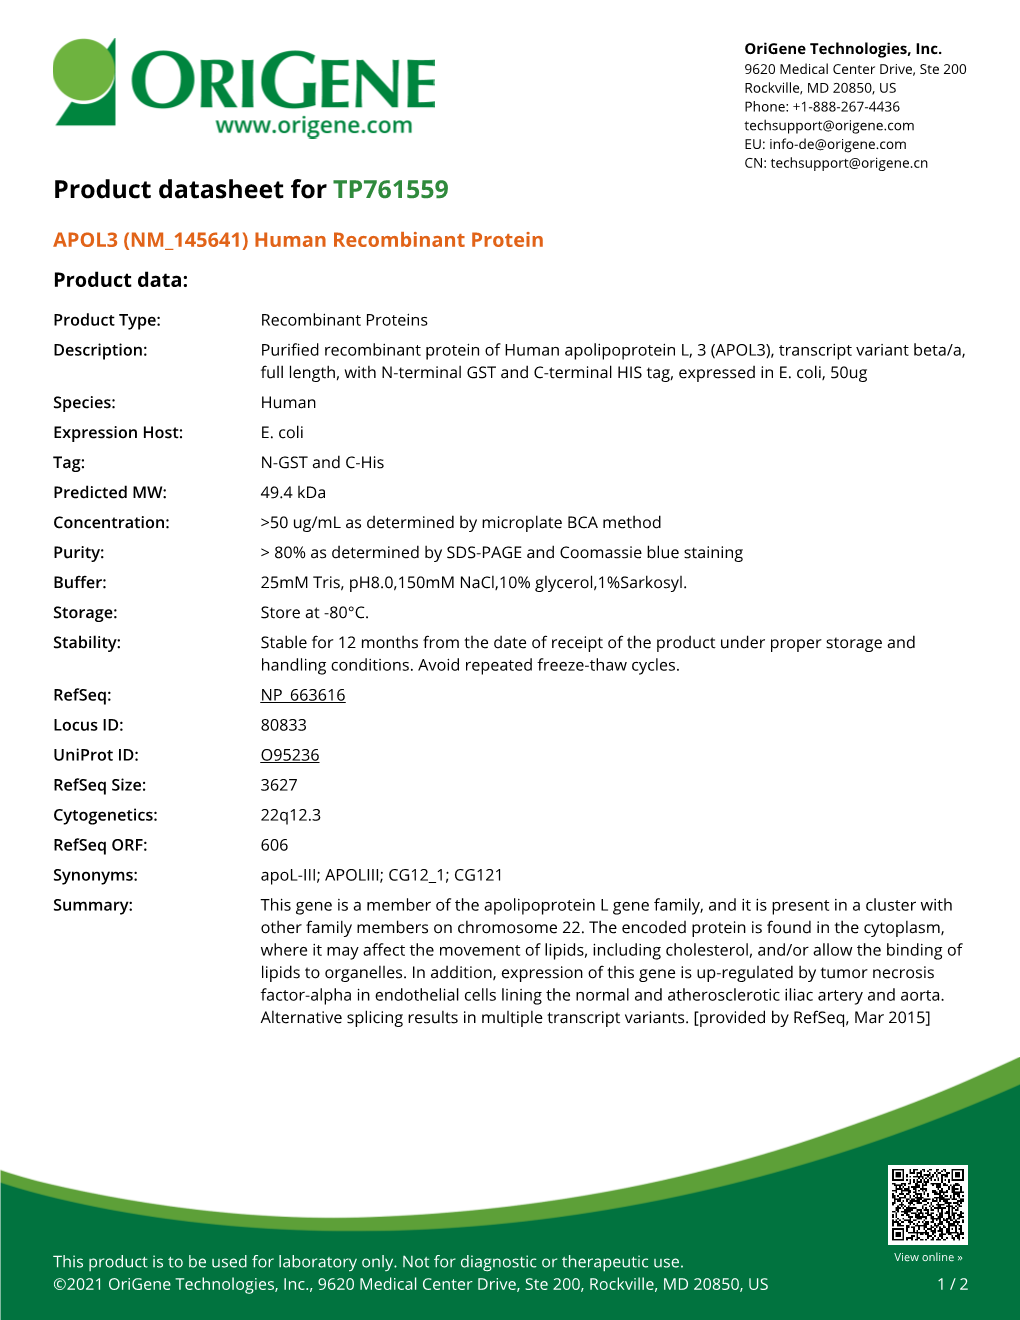 APOL3 (NM 145641) Human Recombinant Protein Product Data